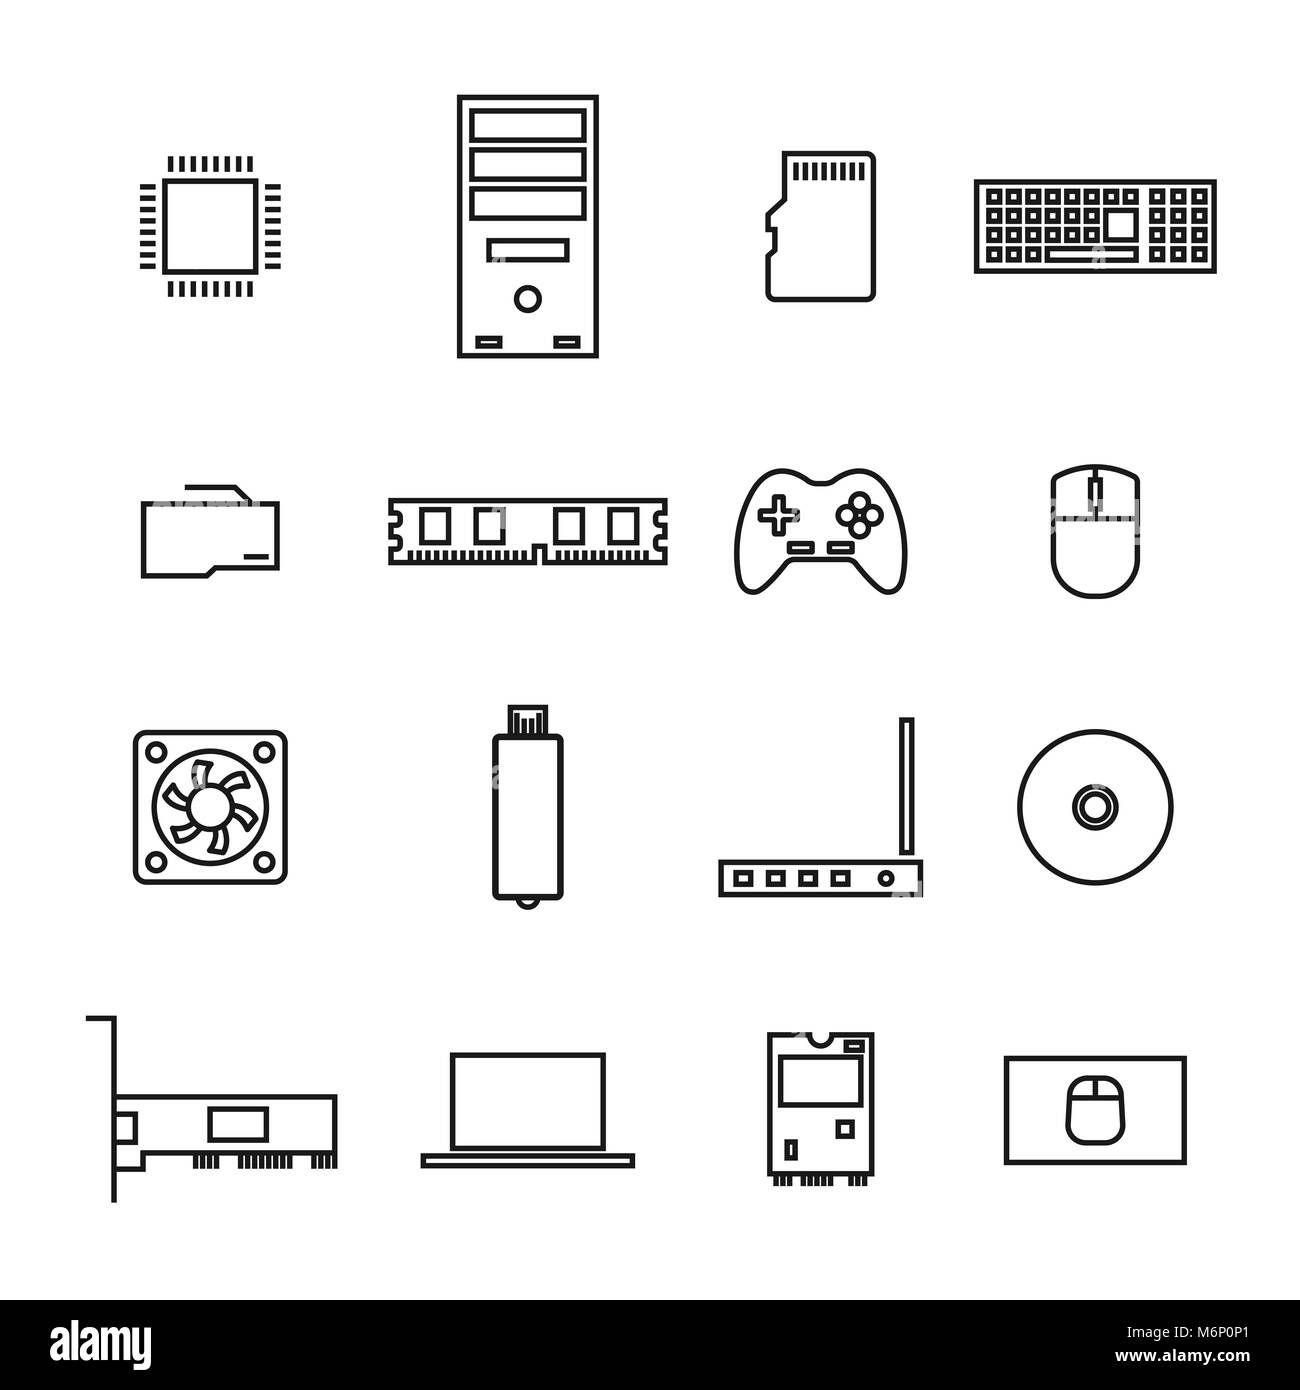 Set of icons computer devices and accessories of thin lines, isolated on white background, vector illustration. Stock Vector